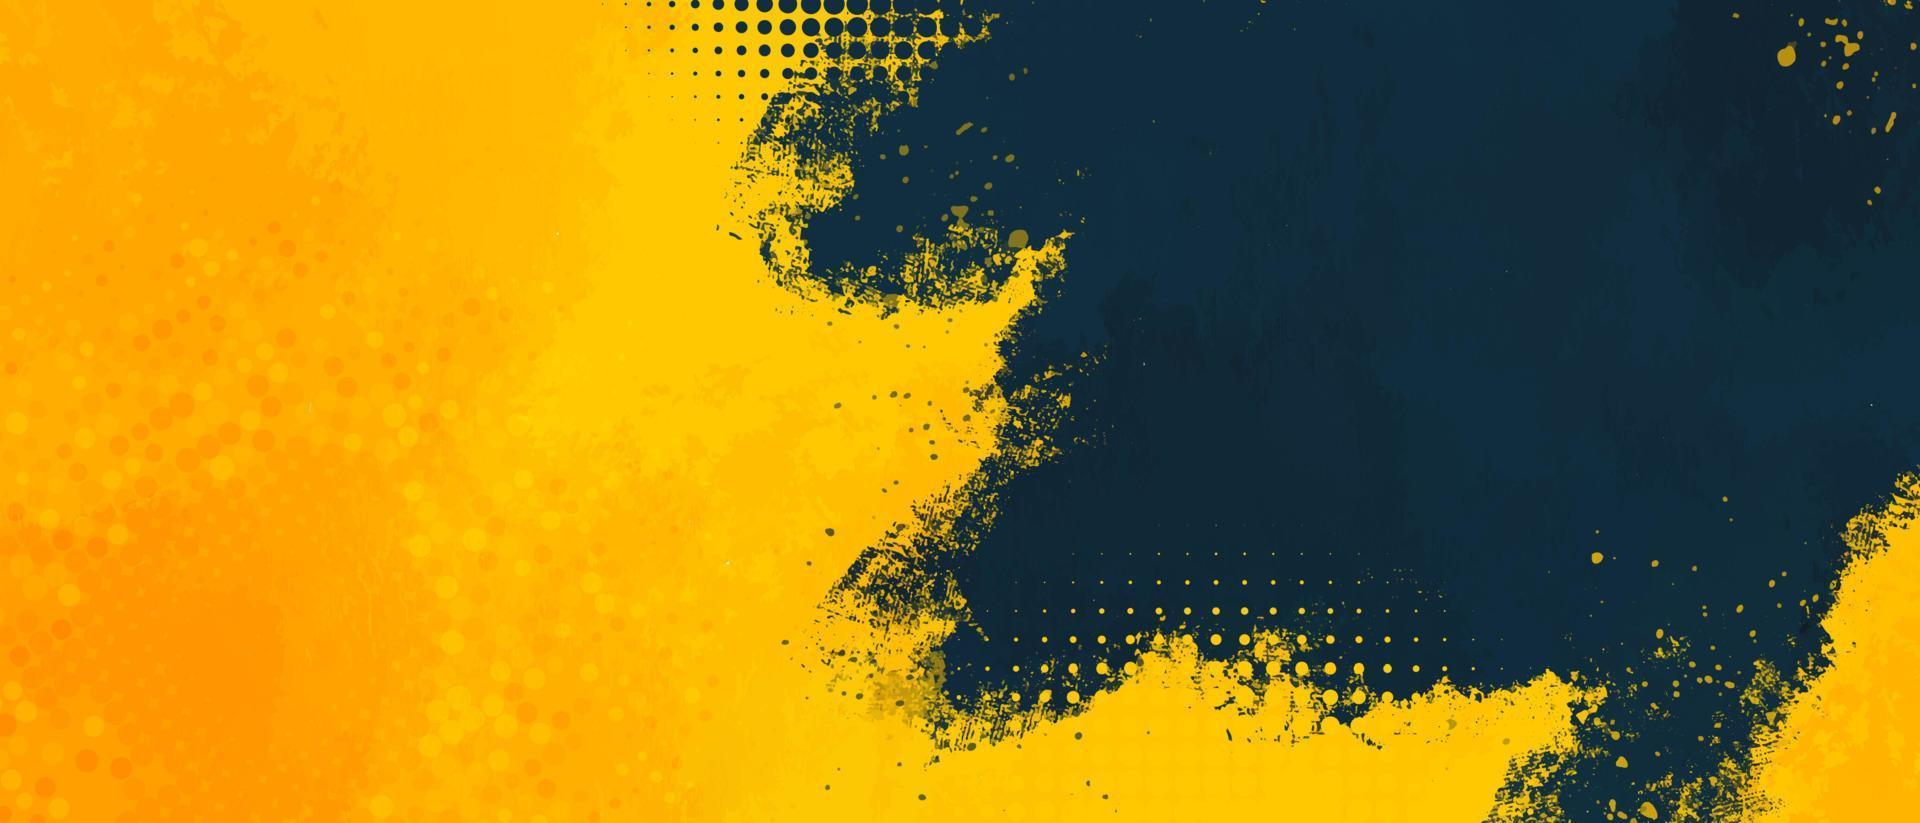 Dark blue and Yellow abstract background with grunge texture. vector